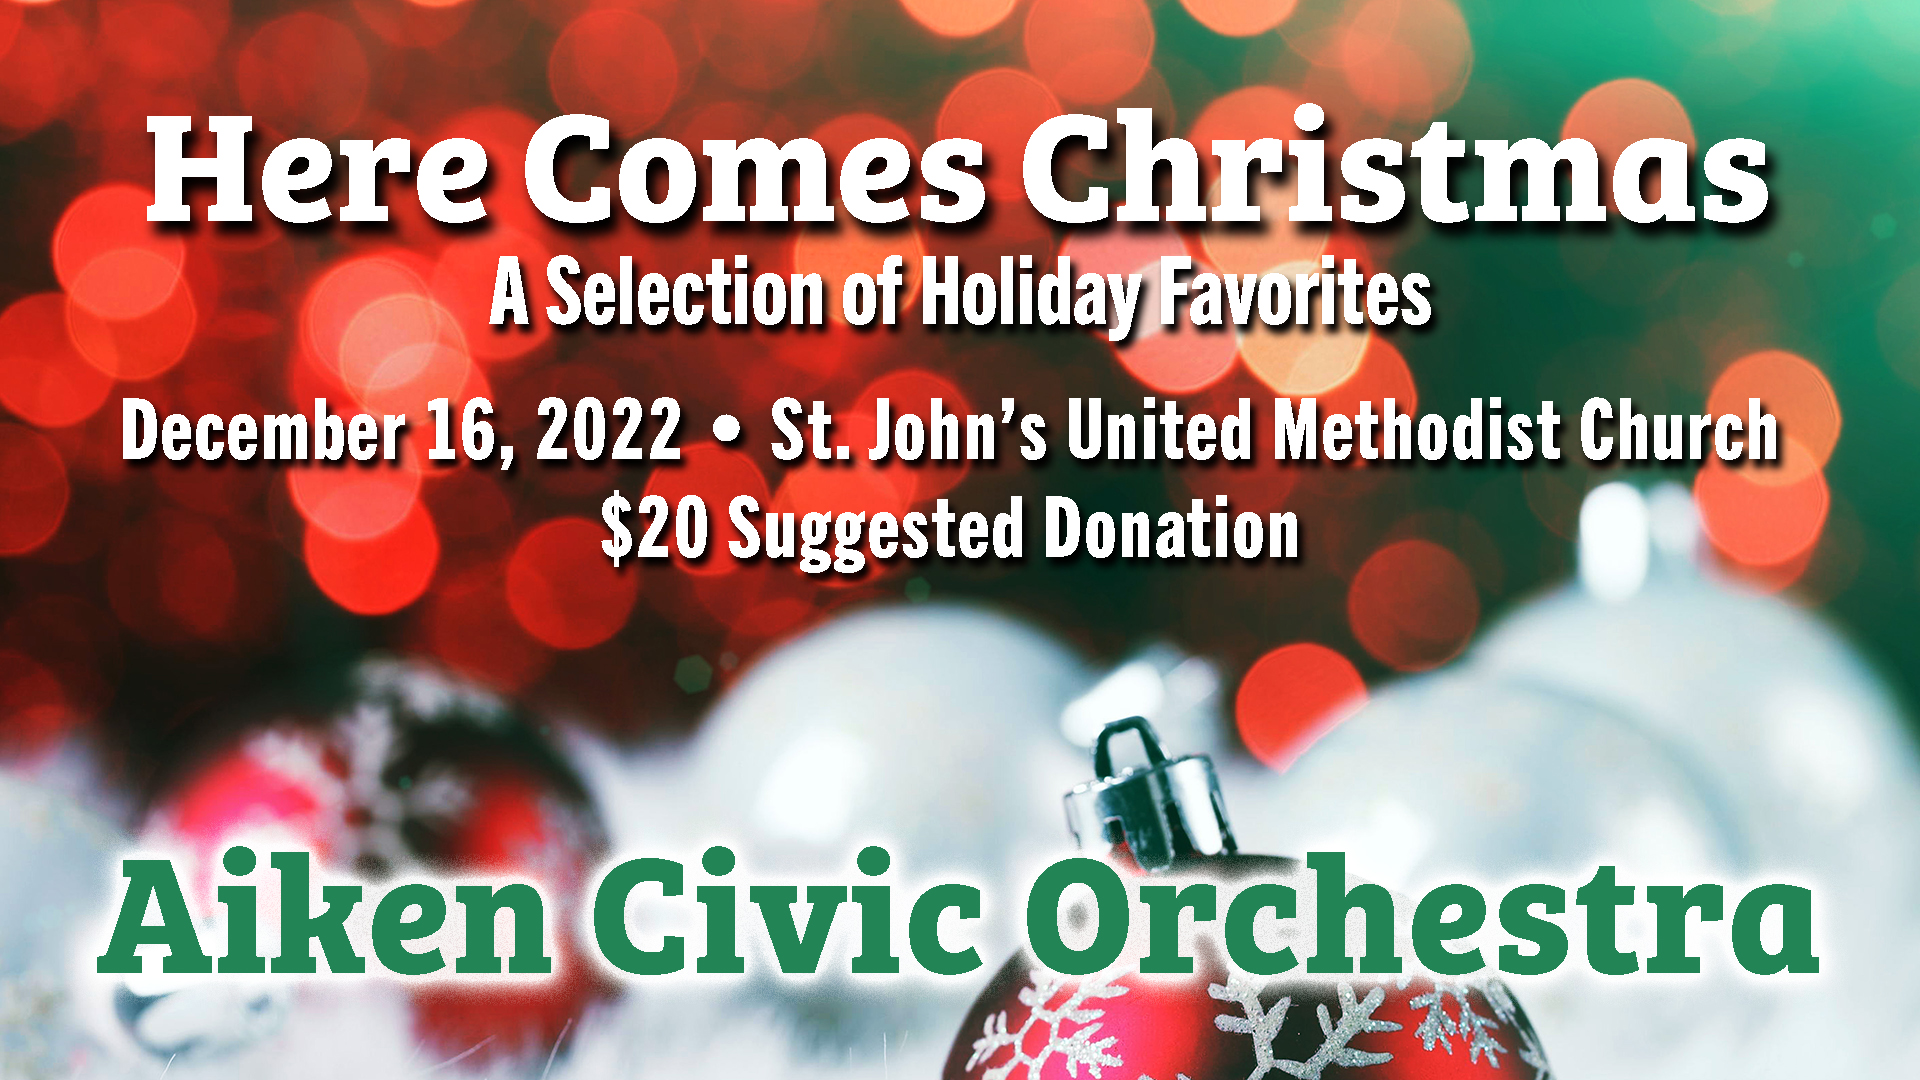 Here Comes Christmas - Aiken Civic Orchestra 2022